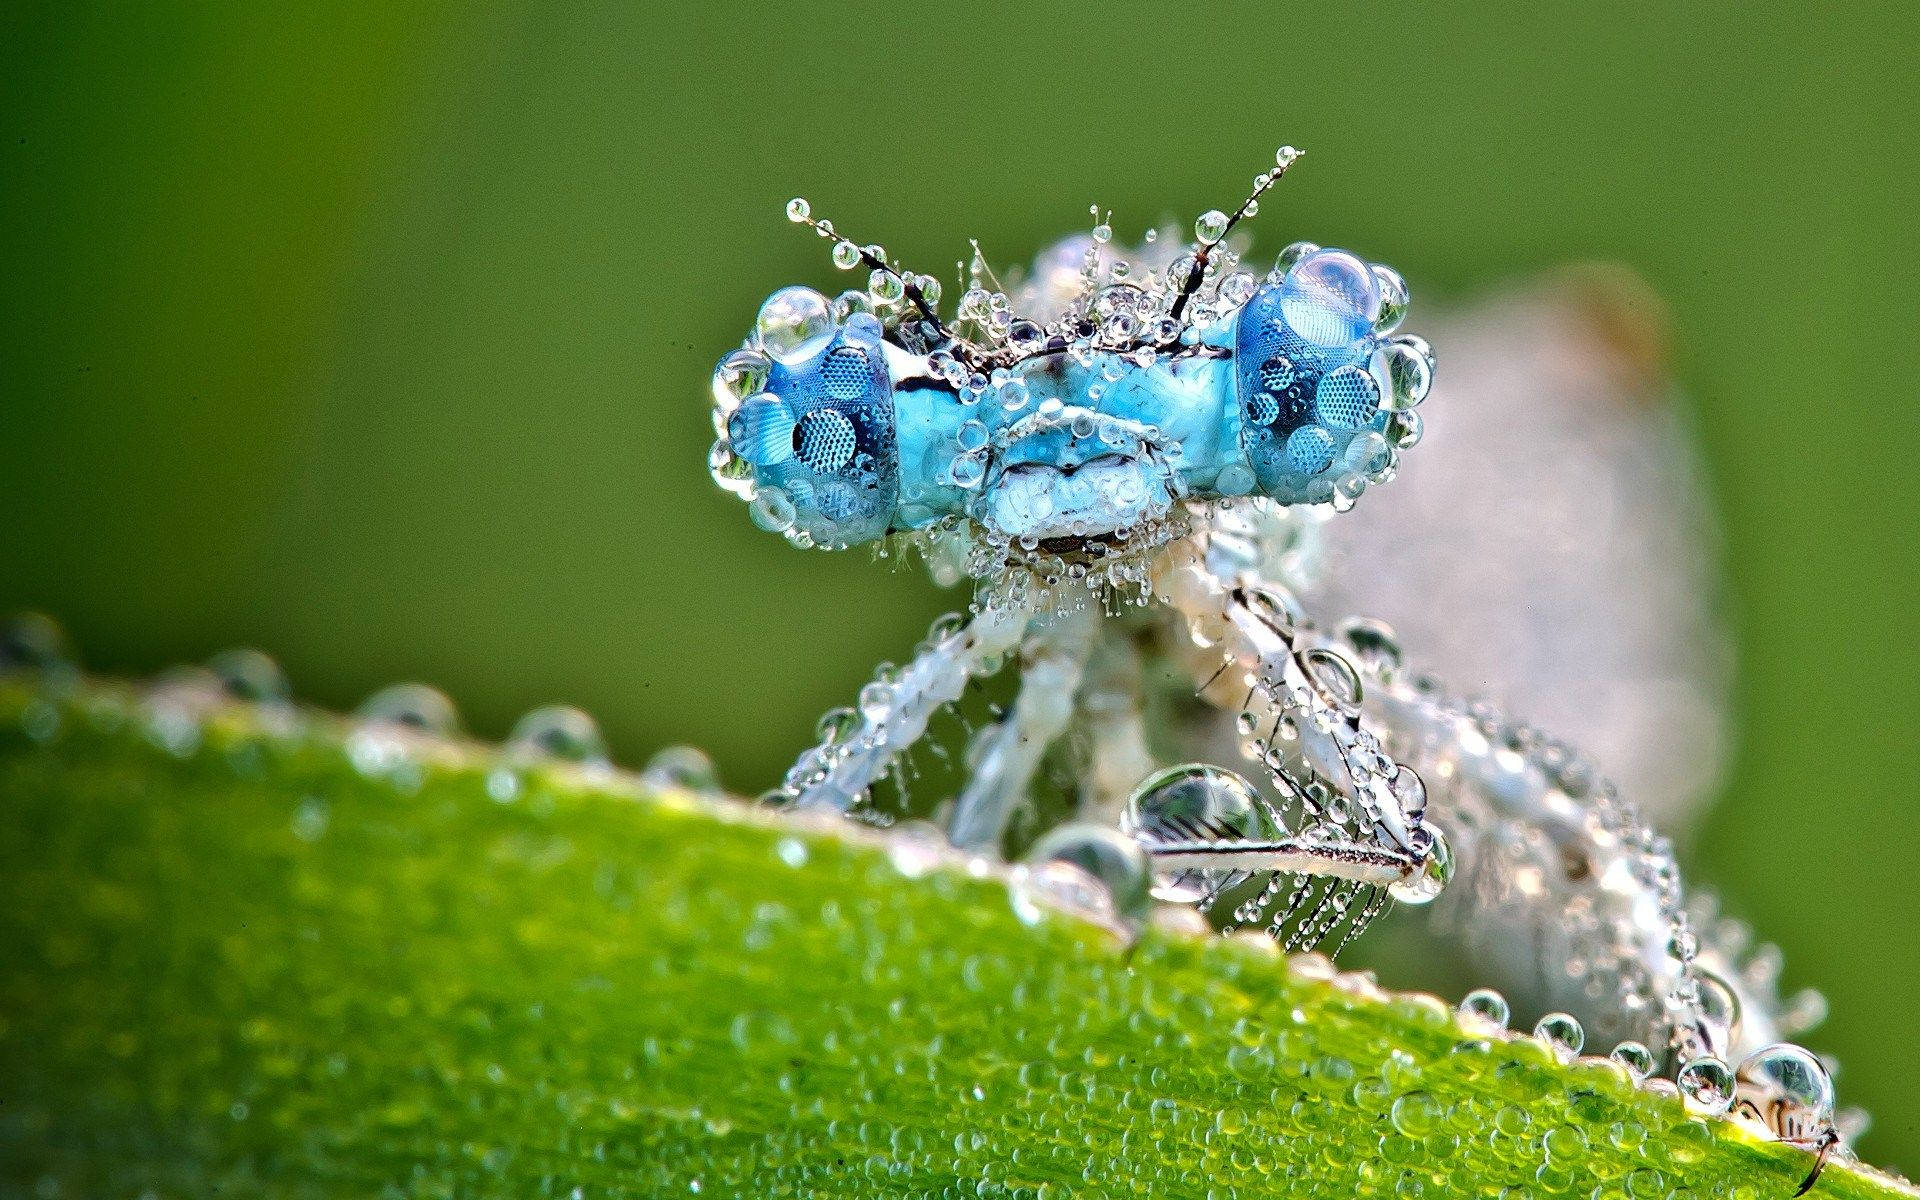 Insect Dragonfly With Water Droplets